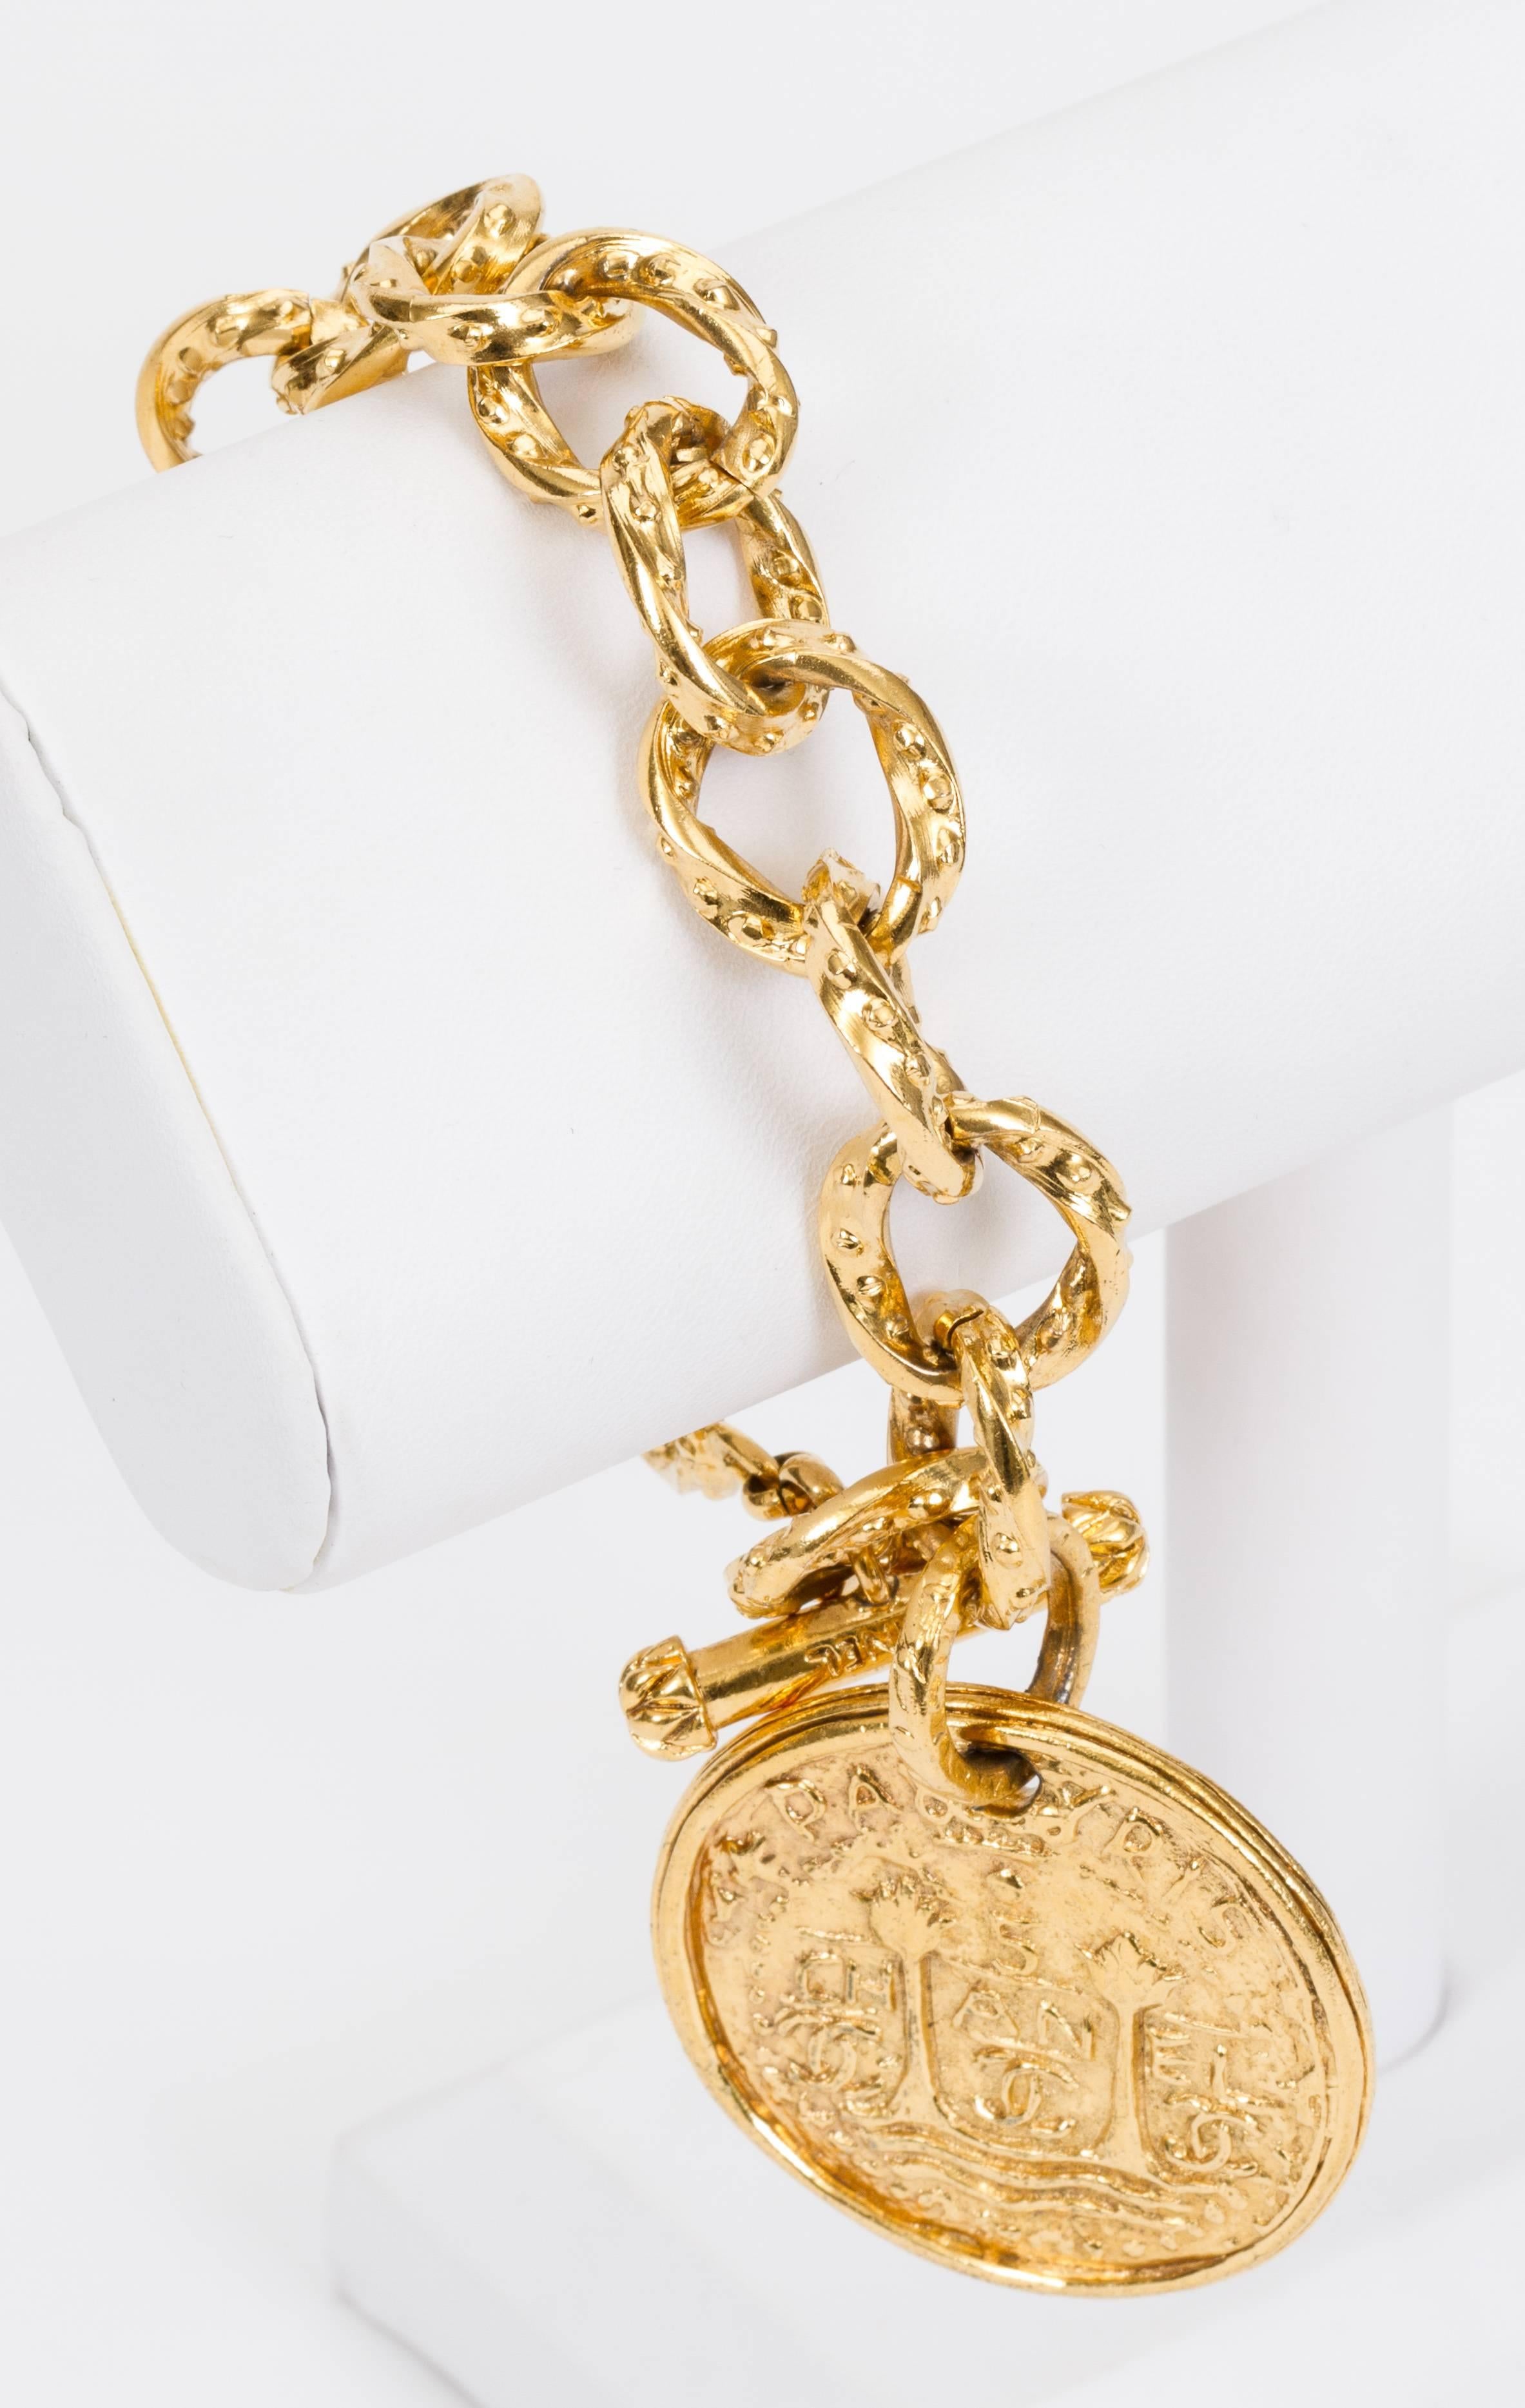 Chanel goldtone bracelet with oversize tarot coin charm. Autumn '93 Collection. Comes with original box.